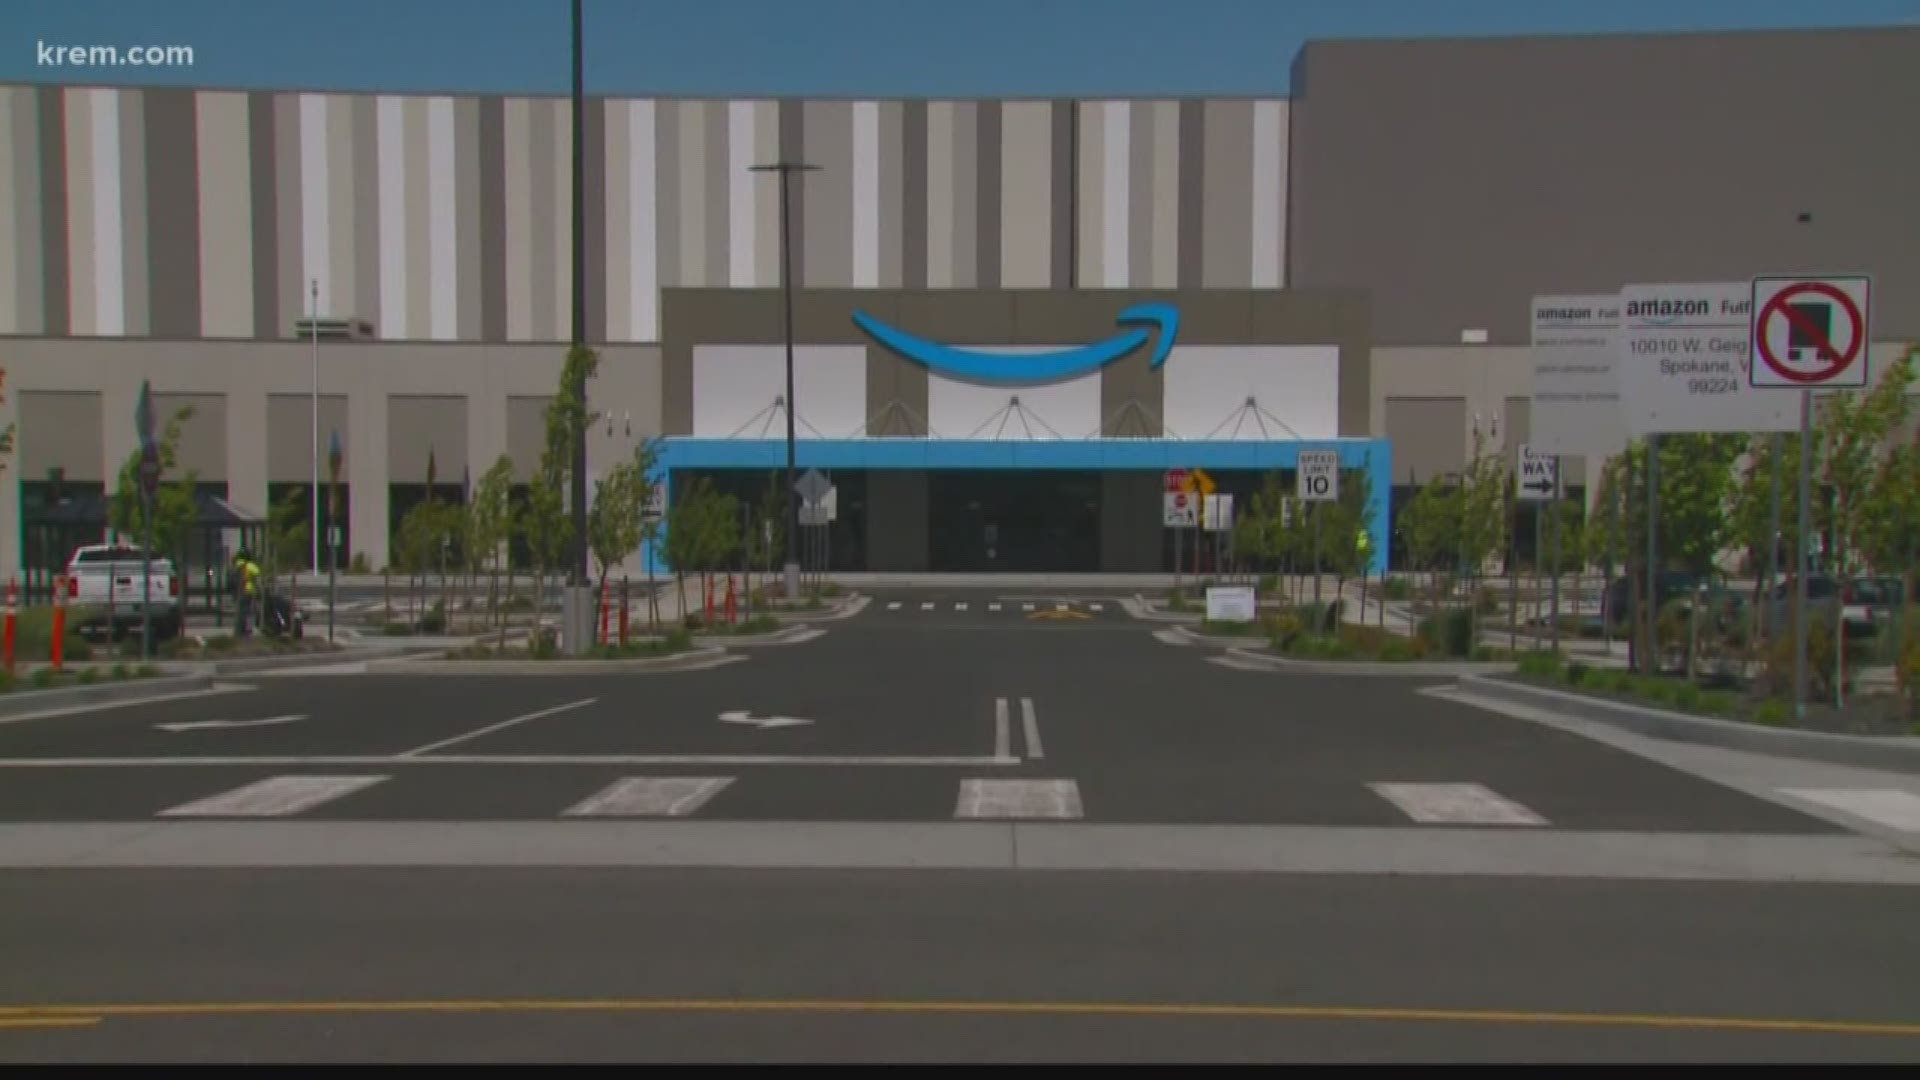 An Amazon Spokesperson confirmed the fulfillment center is set to launch on Sunday, June 7.